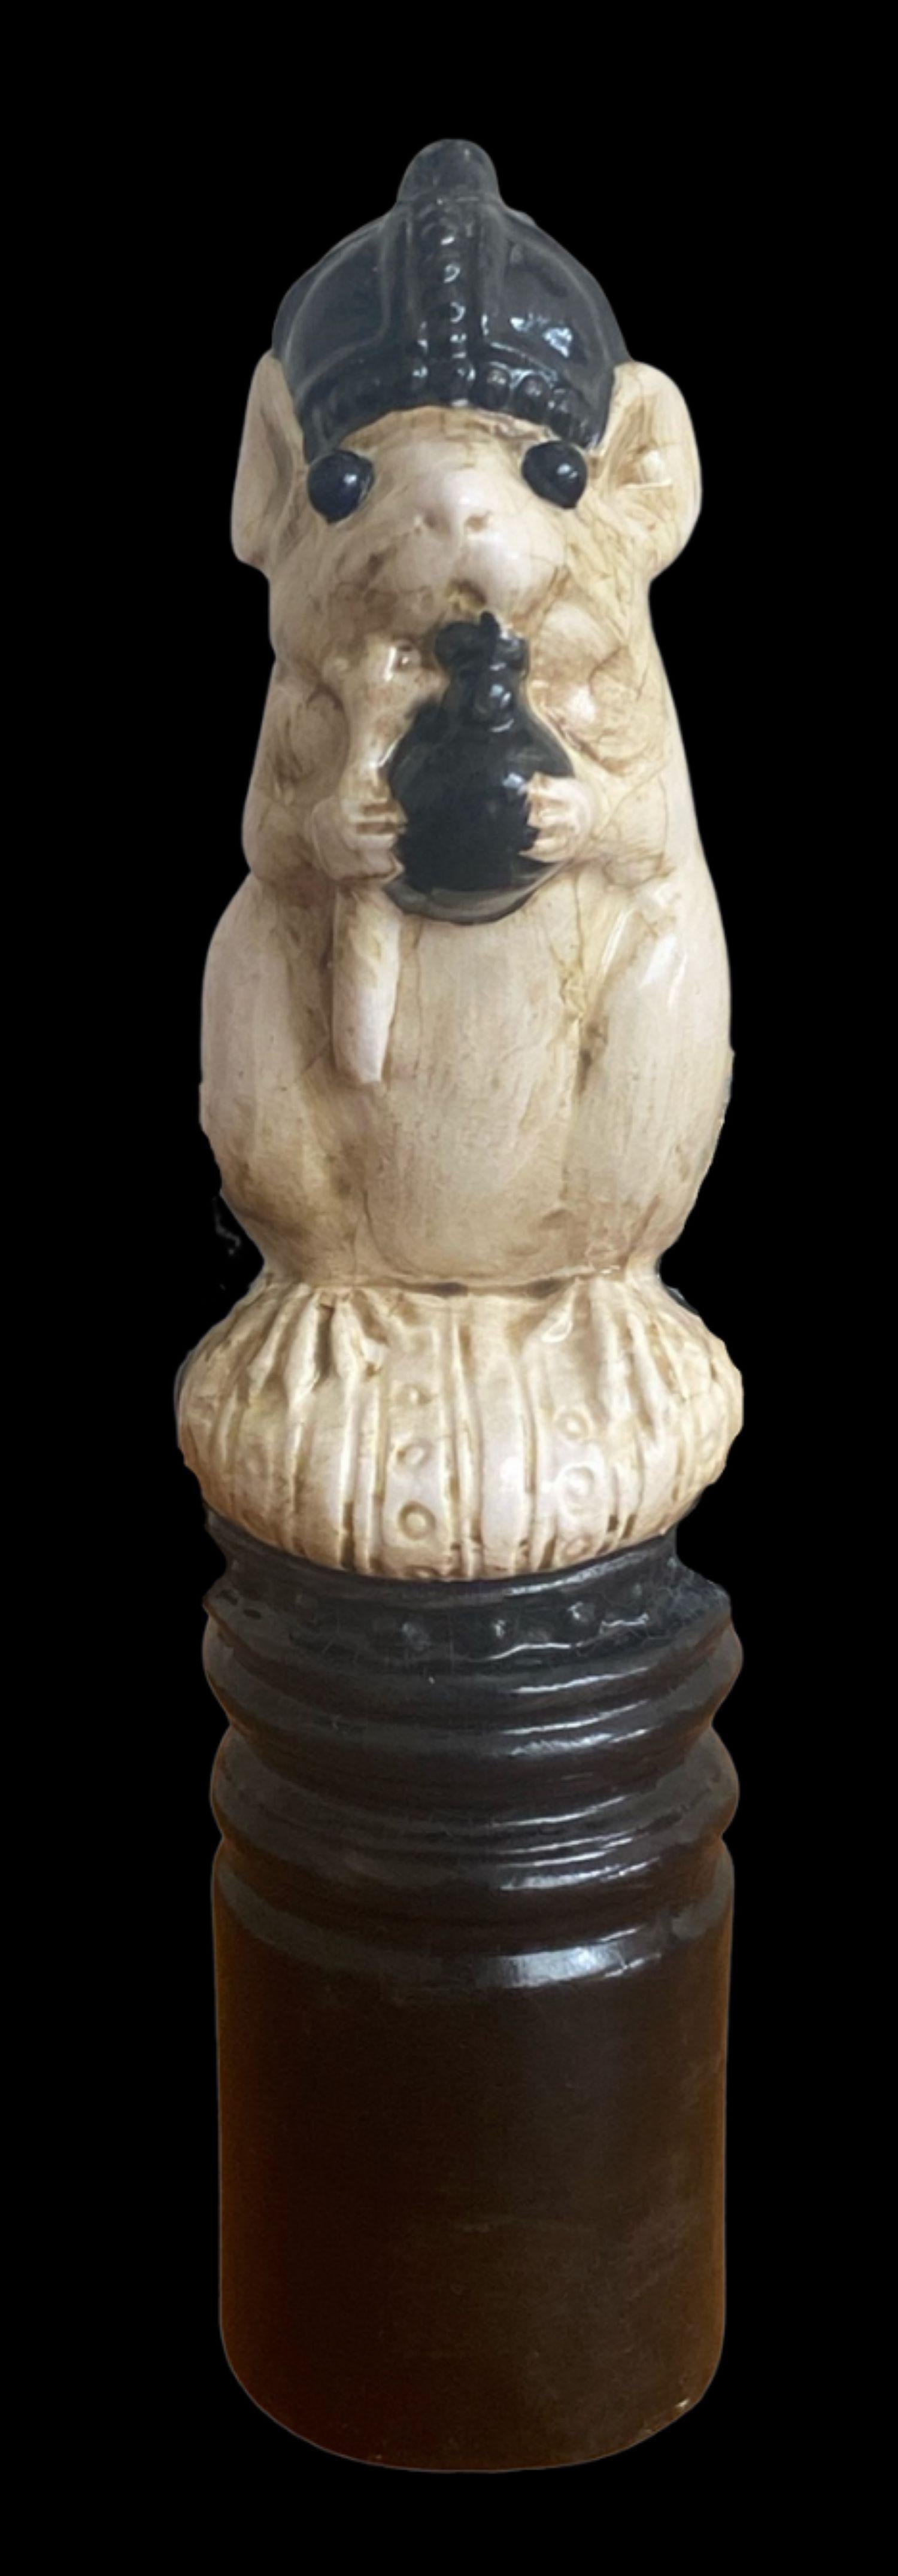 5133

George Tinworth for Doulton. Rare black king chess piece modelled as a Mouse

Small glaze frits to base.

Dimensions
11cm high

Complimentary insured postage
14 Day Money Back Guarantee
BADA Member – Buy the Best from the Best.